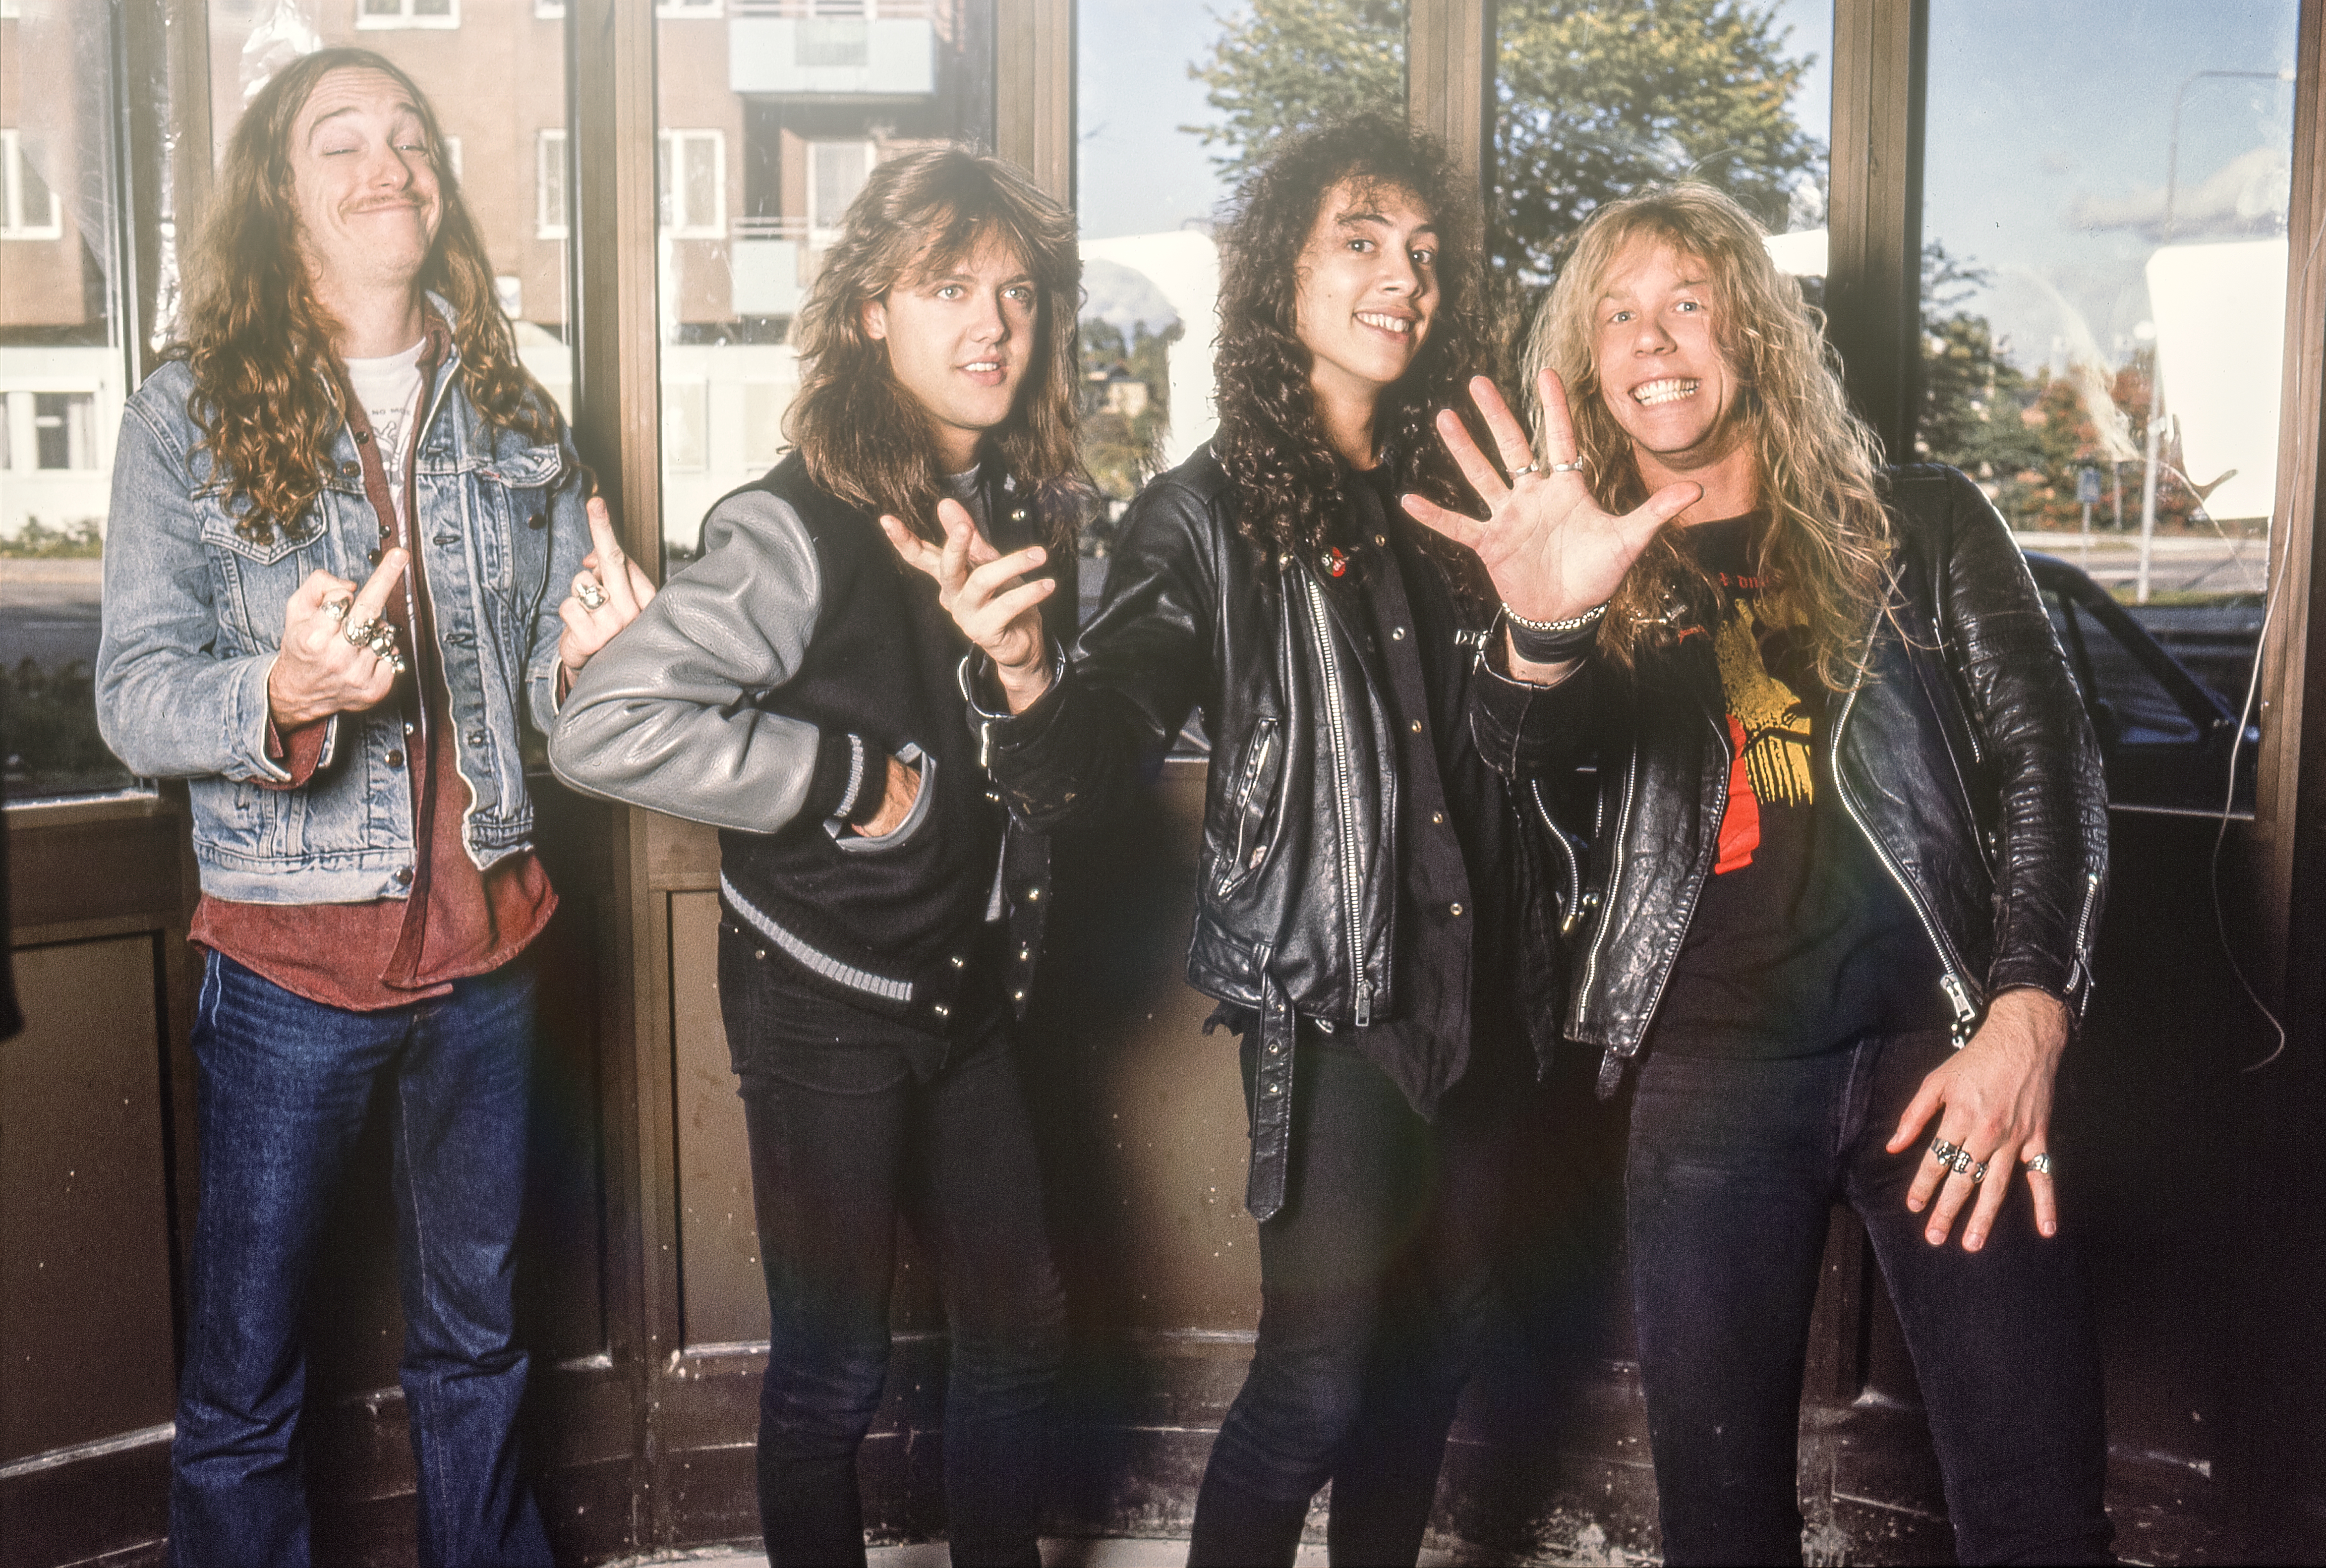 The Metallica boys in 1986. From left: Cliff Burton, Lars Ulrich, Kirk Hammett and James Hetfield. Photo by Chris Anthony